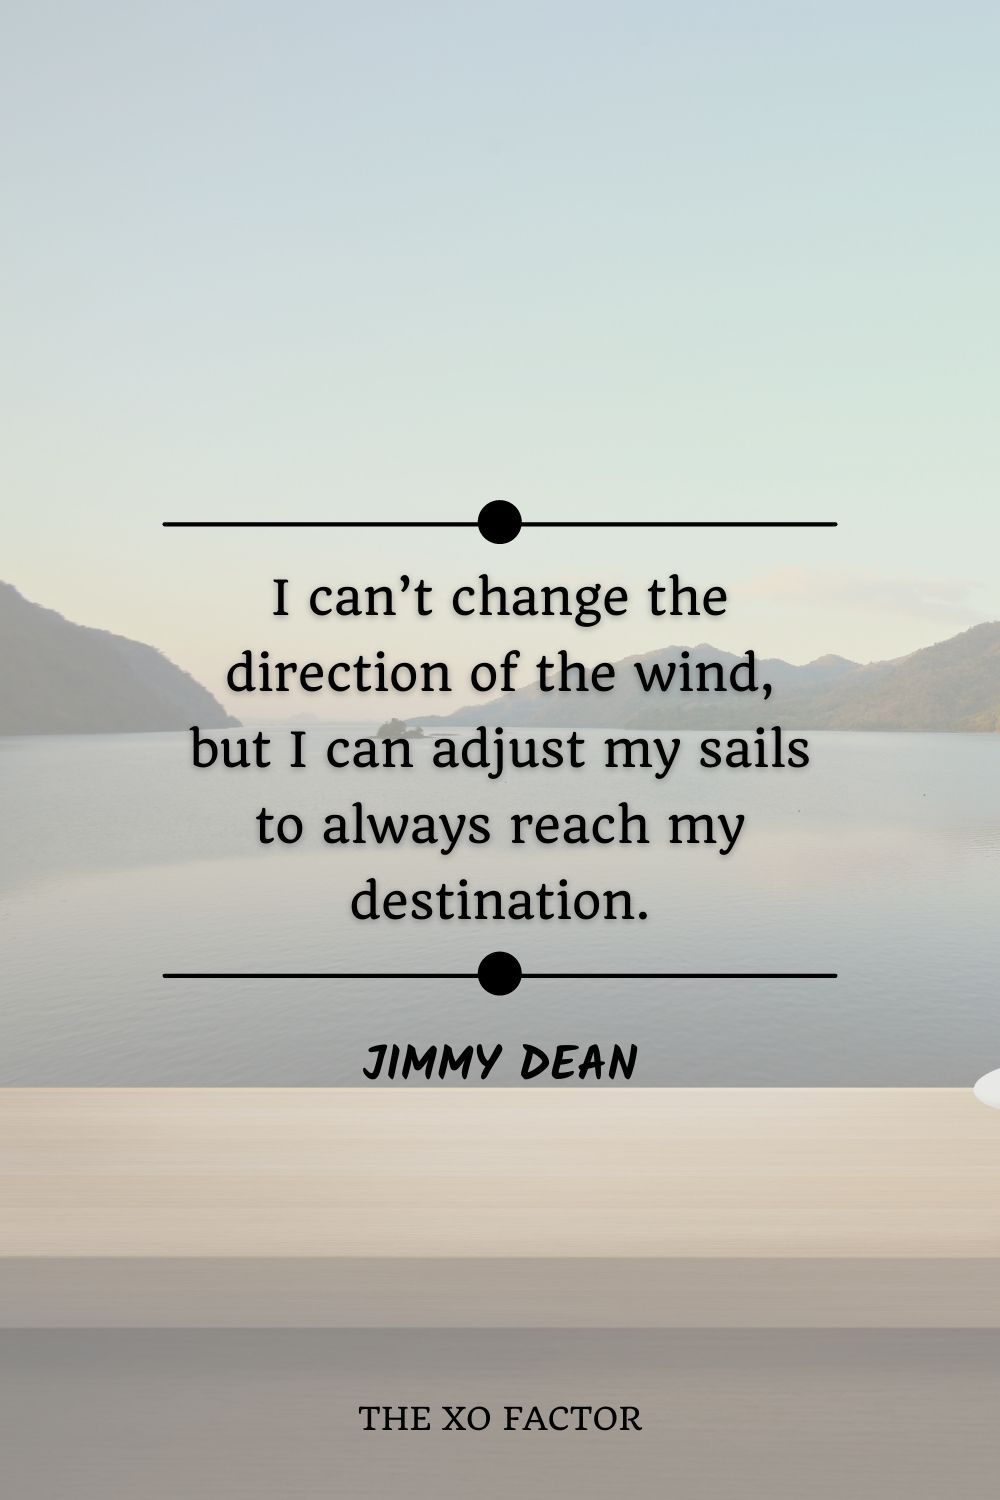 I can’t change the direction of the wind, but I can adjust my sails to always reach my destination.” – Jimmy Dean